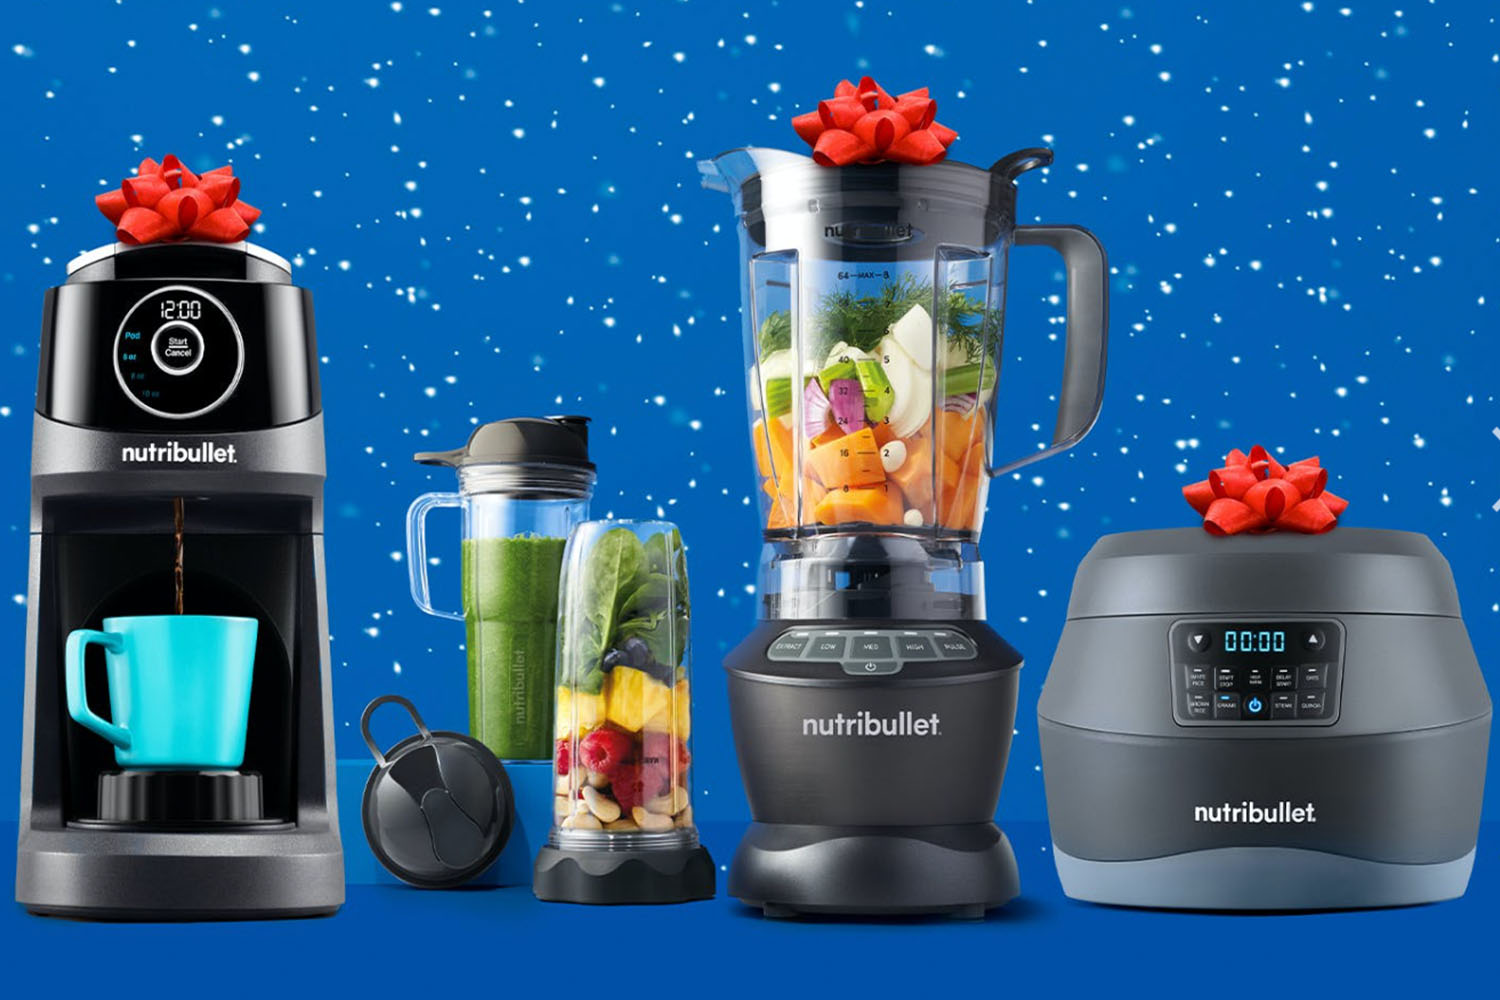 a mix of holiday decorated appliances